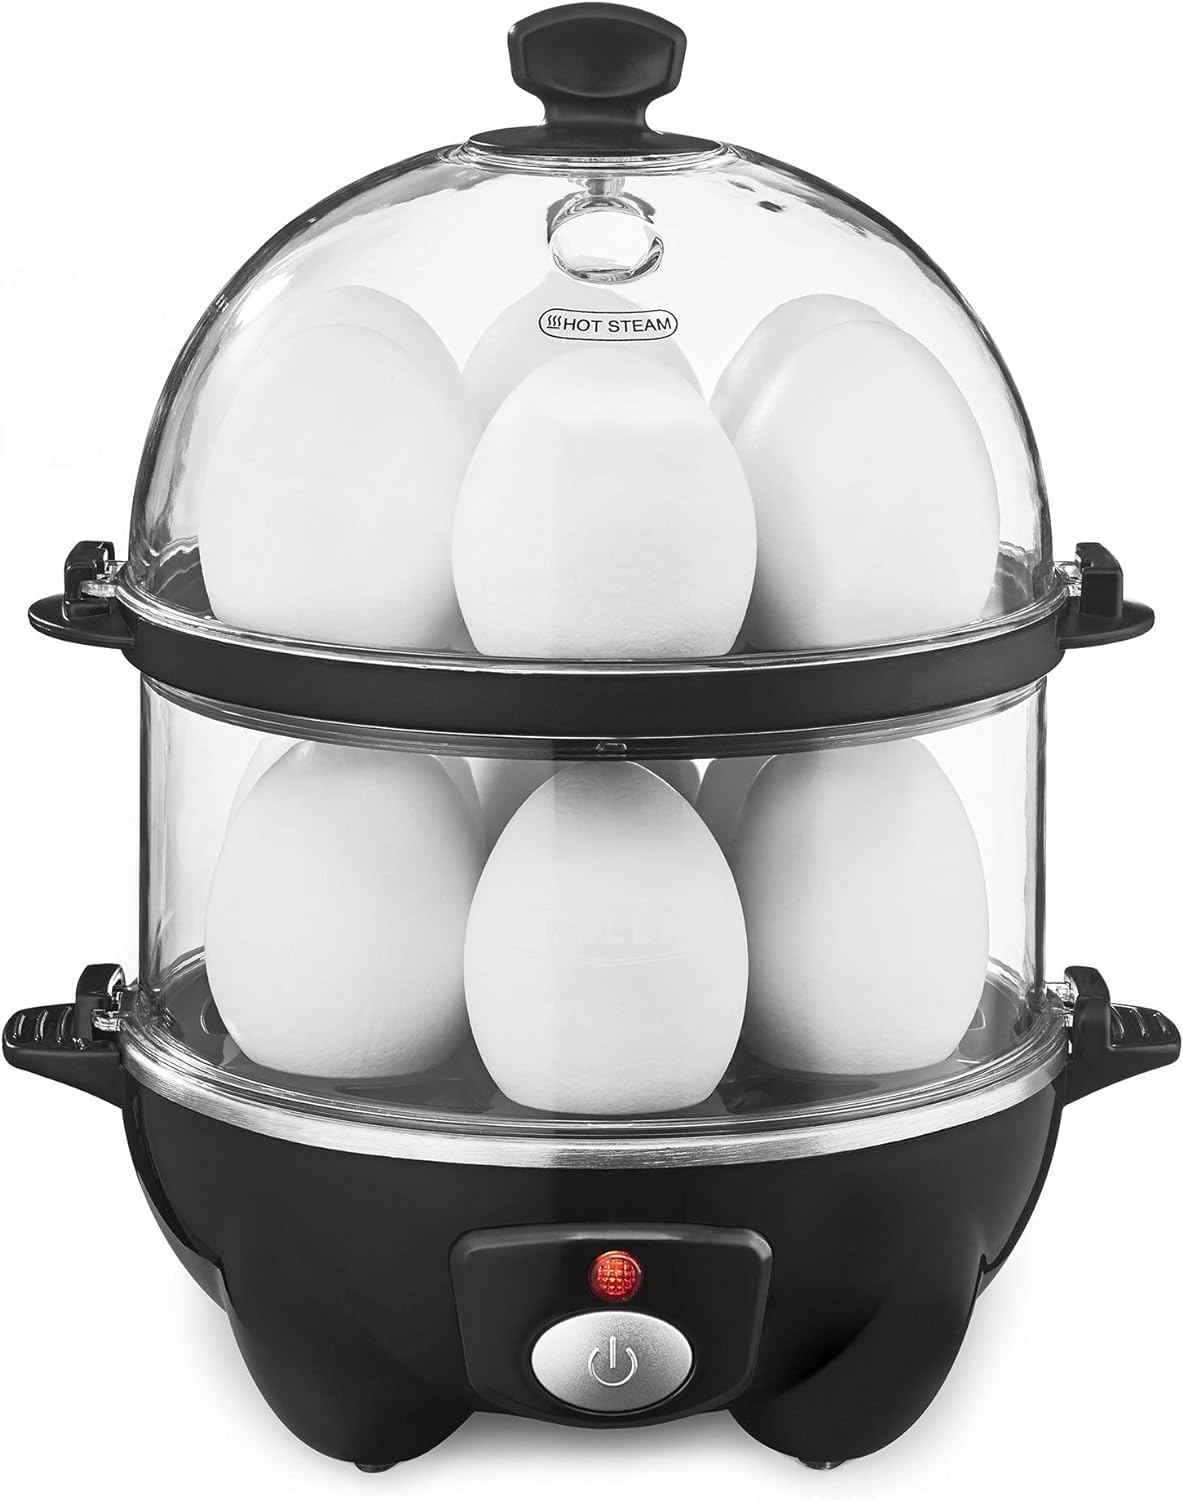 BELLA Double Tier Egg Cooker, Boiler, Rapid Maker & Poacher, Meal Prep for Week, Family Sized Meals: Up To 12 Large Boiled Eggs, Dishwasher Safe, Poaching and Omelet Trays Included, One, Black